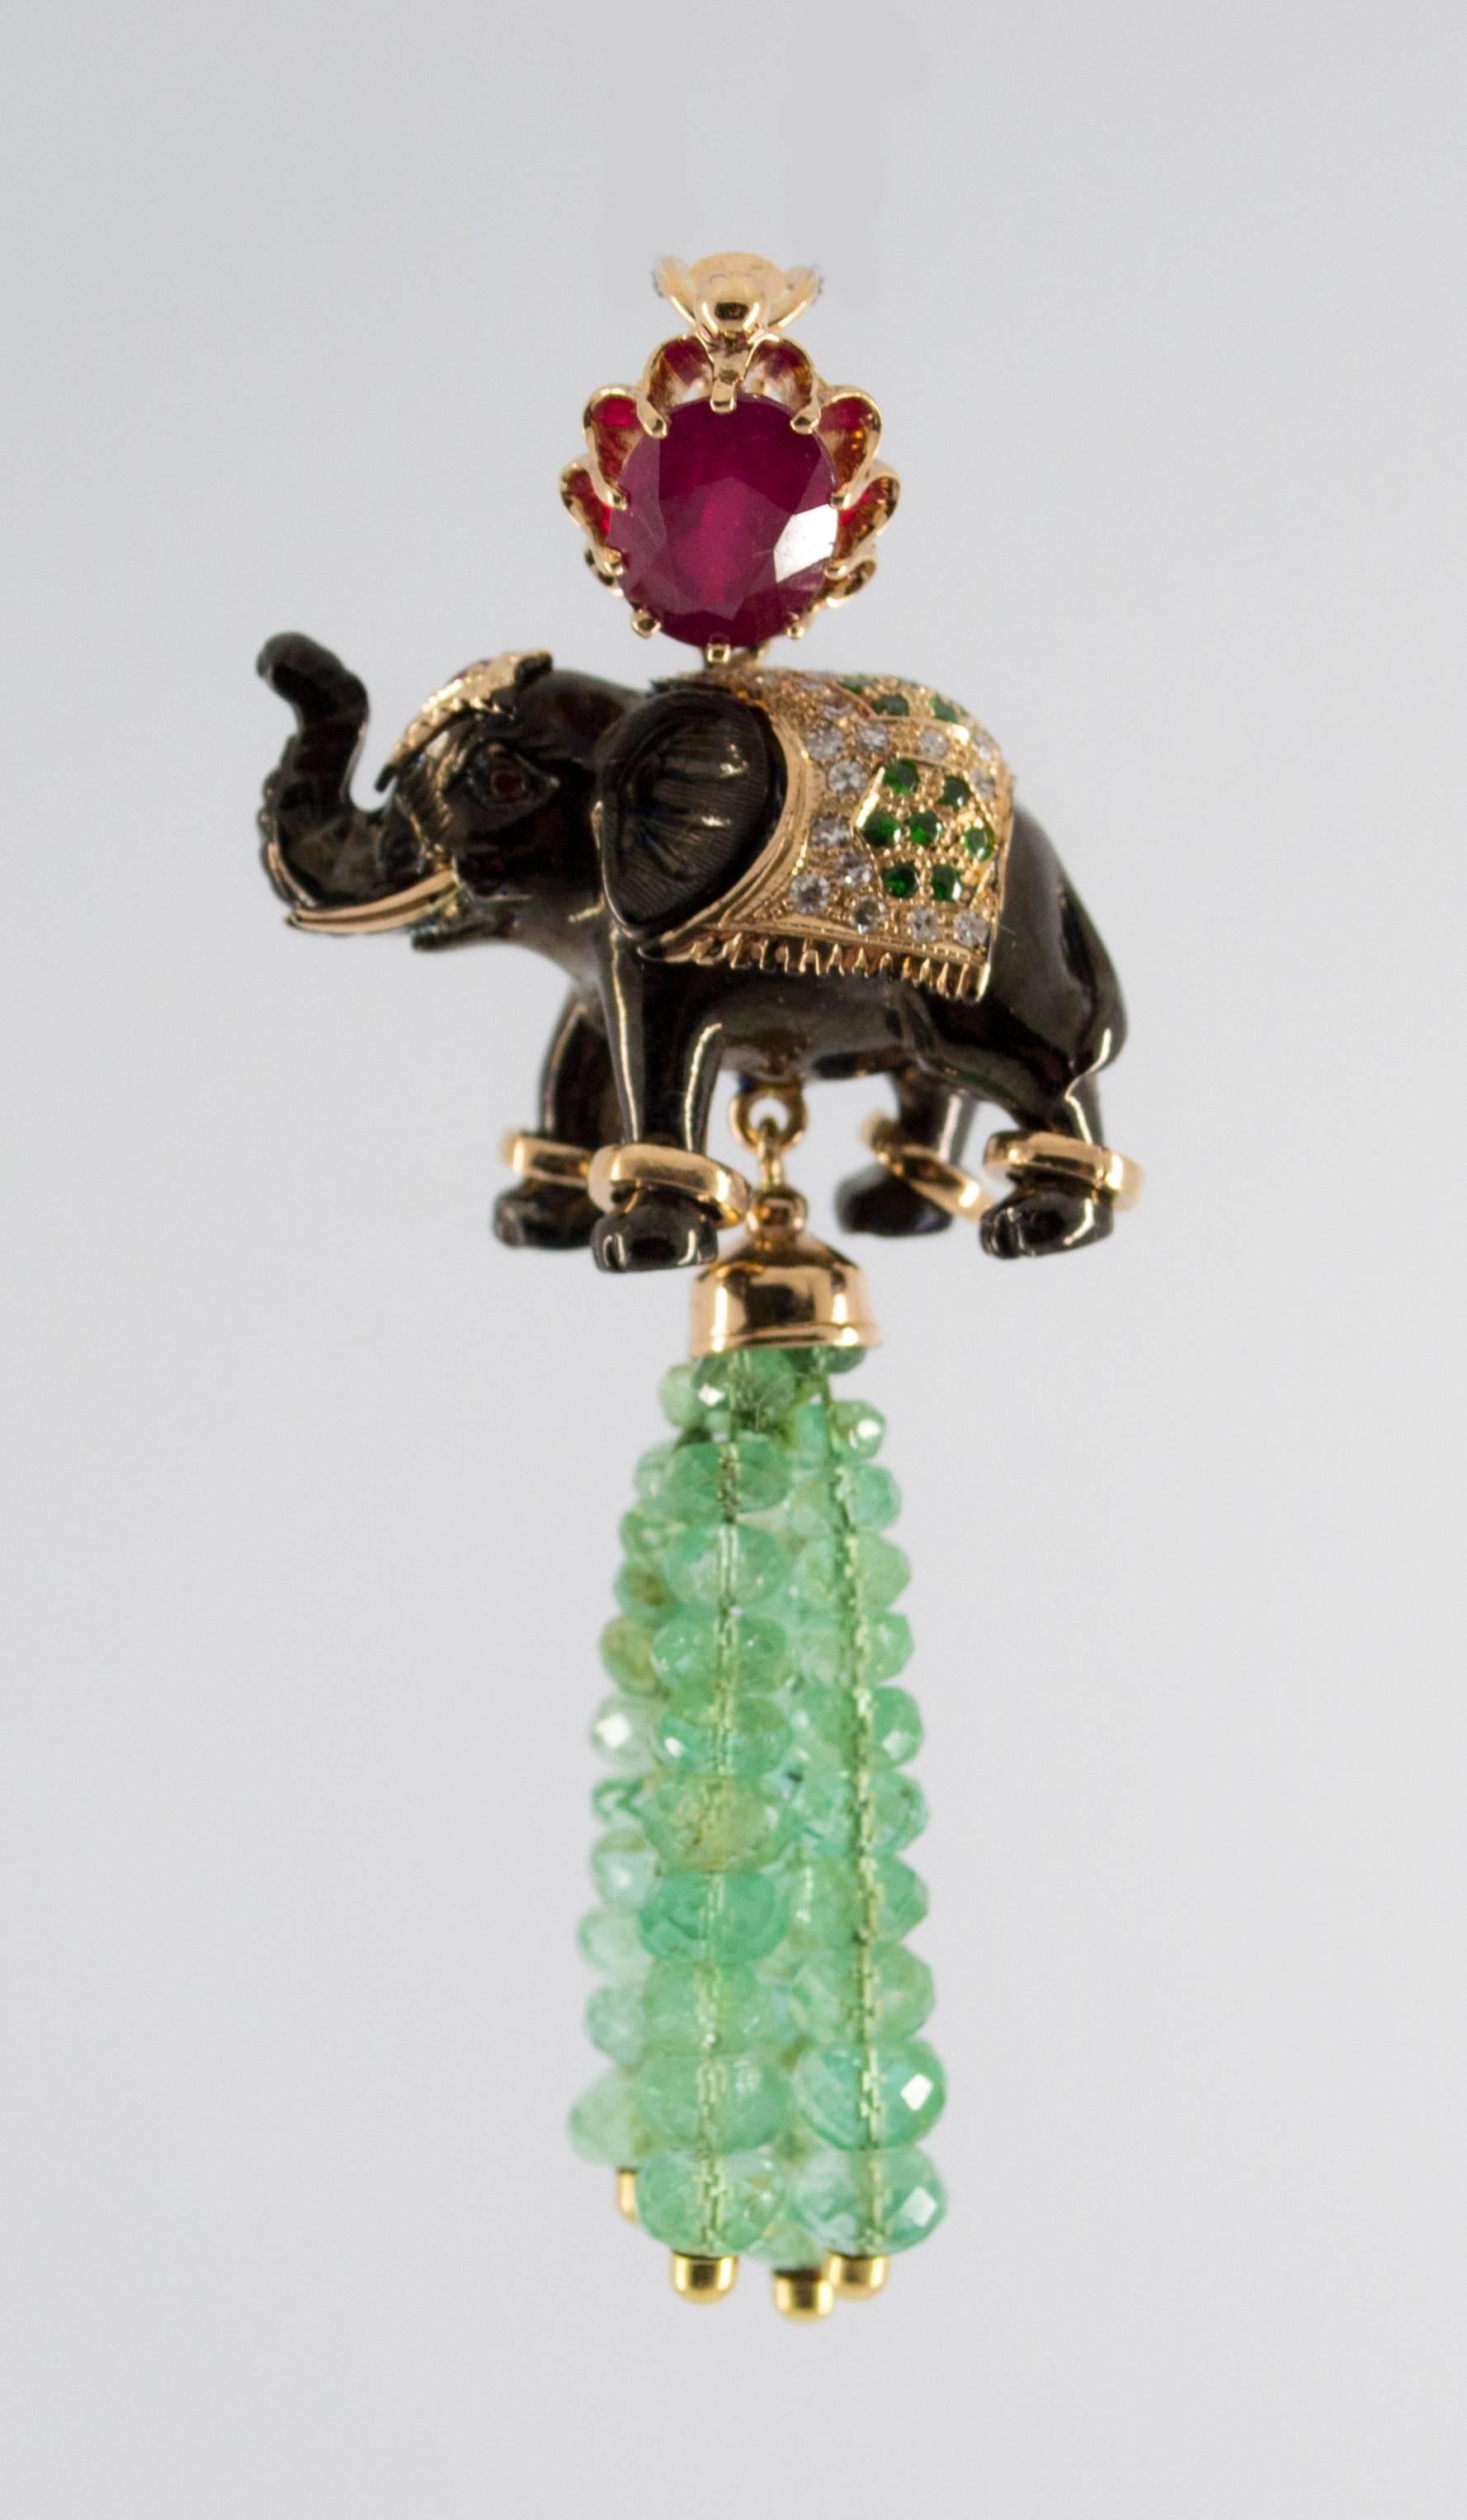 This Elephant Pendant is made of 14K Yellow Gold and Sterling Silver.
This Pendant has 19.90 Carats of Emeralds.
This Pendant has 3.10 Carats of Rubies.
This Pendant has 0.30 Carats of Tsavorite.
This Pendant has 0.35 Carats of Diamonds.
We're a